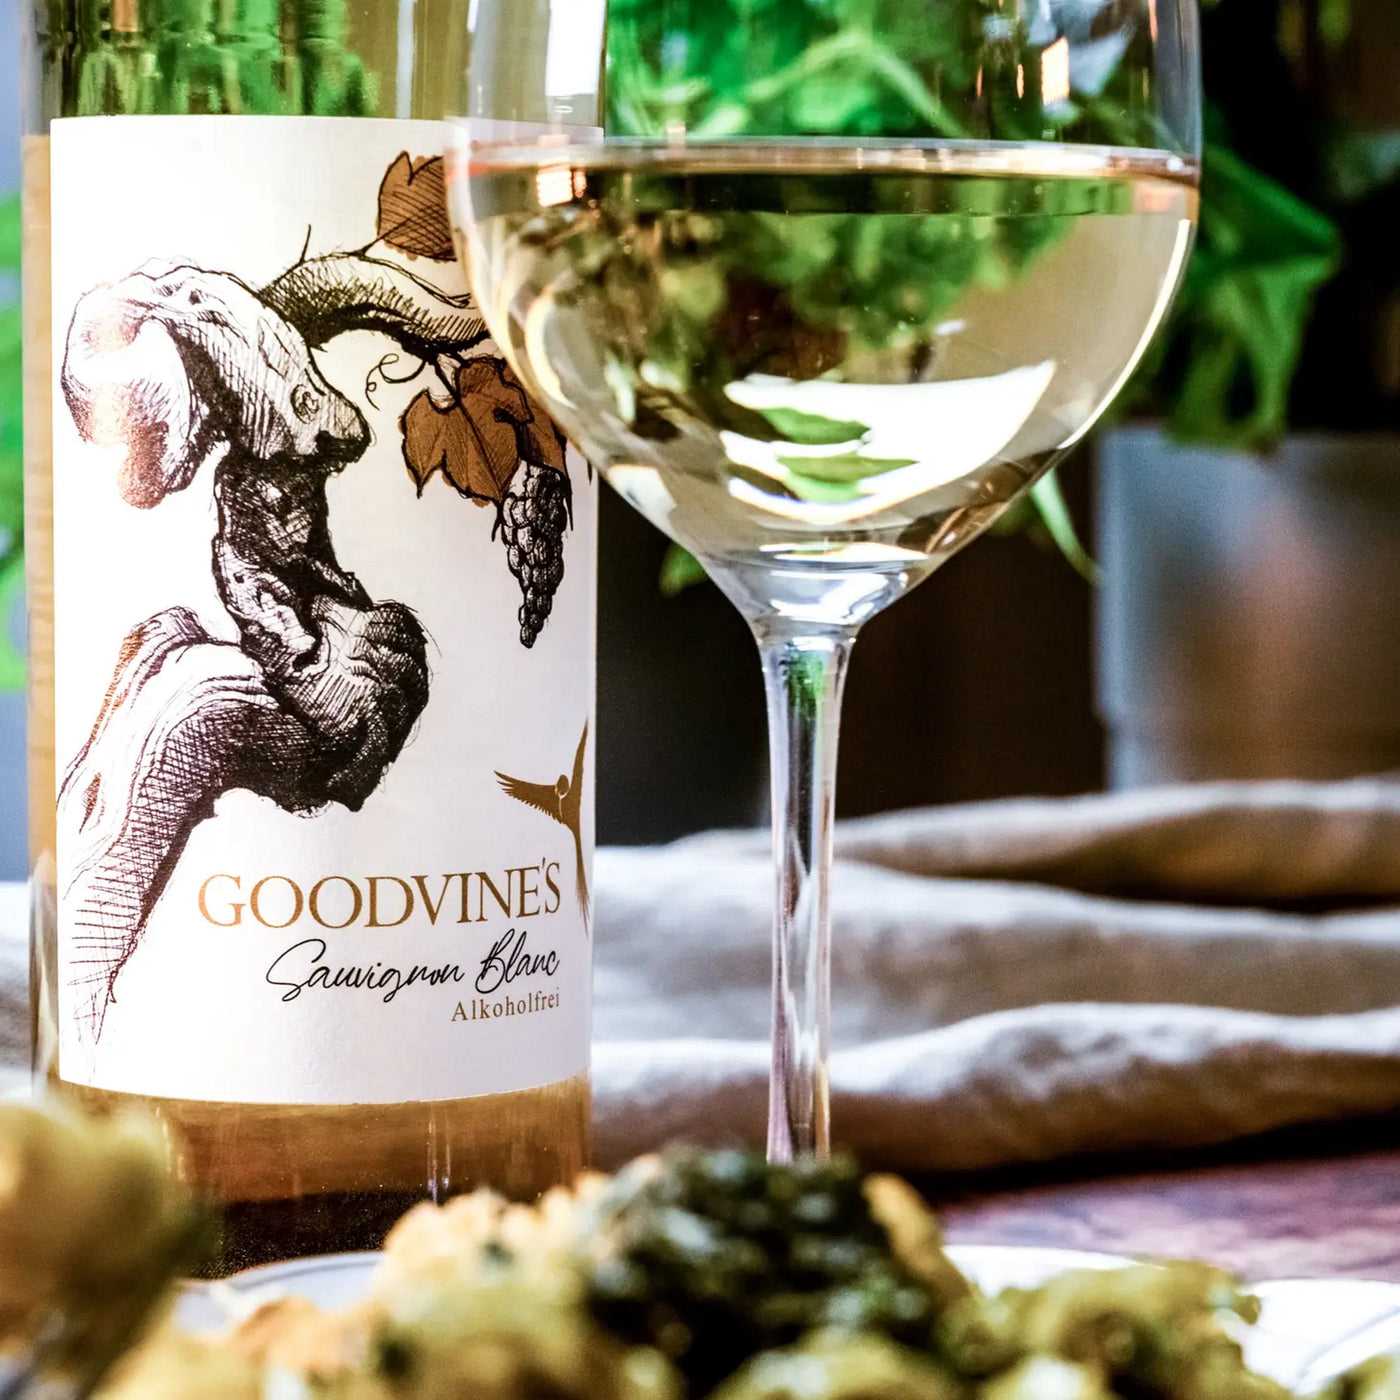 Goodvines Sauvignon Blanc - sophisticated adult drinking without alcohol